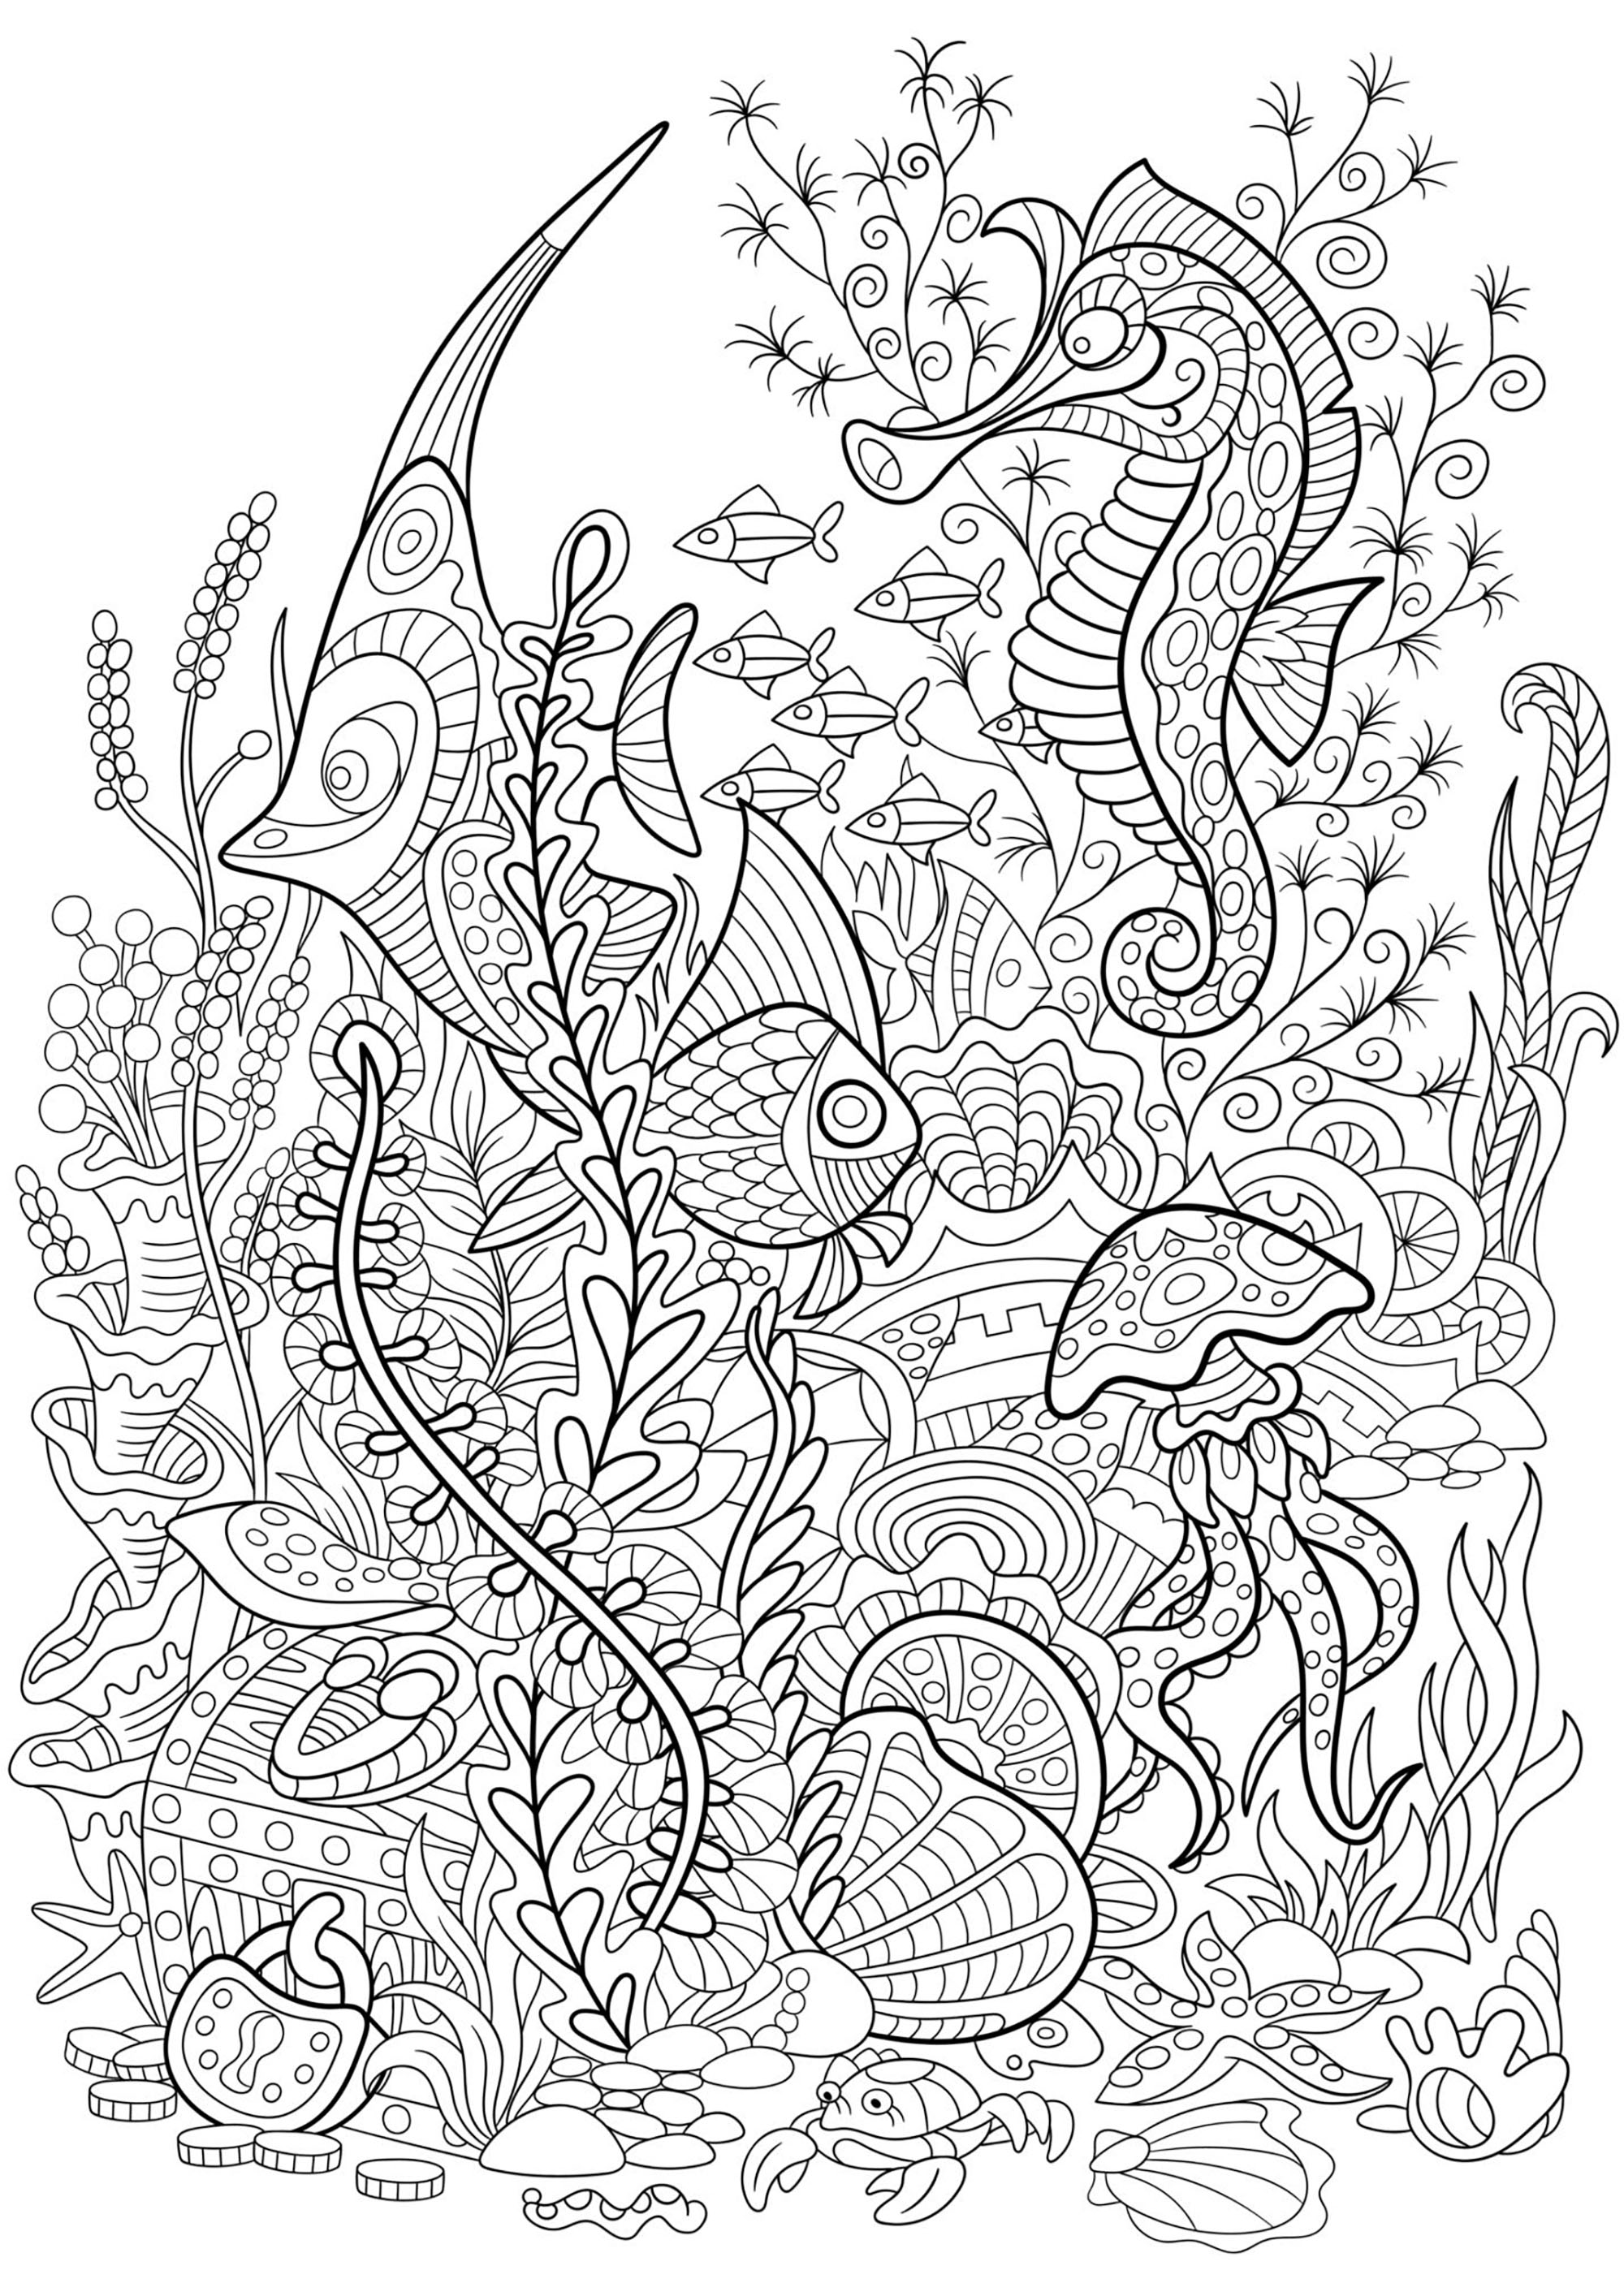 Seaworld - Water worlds Adult Coloring Pages